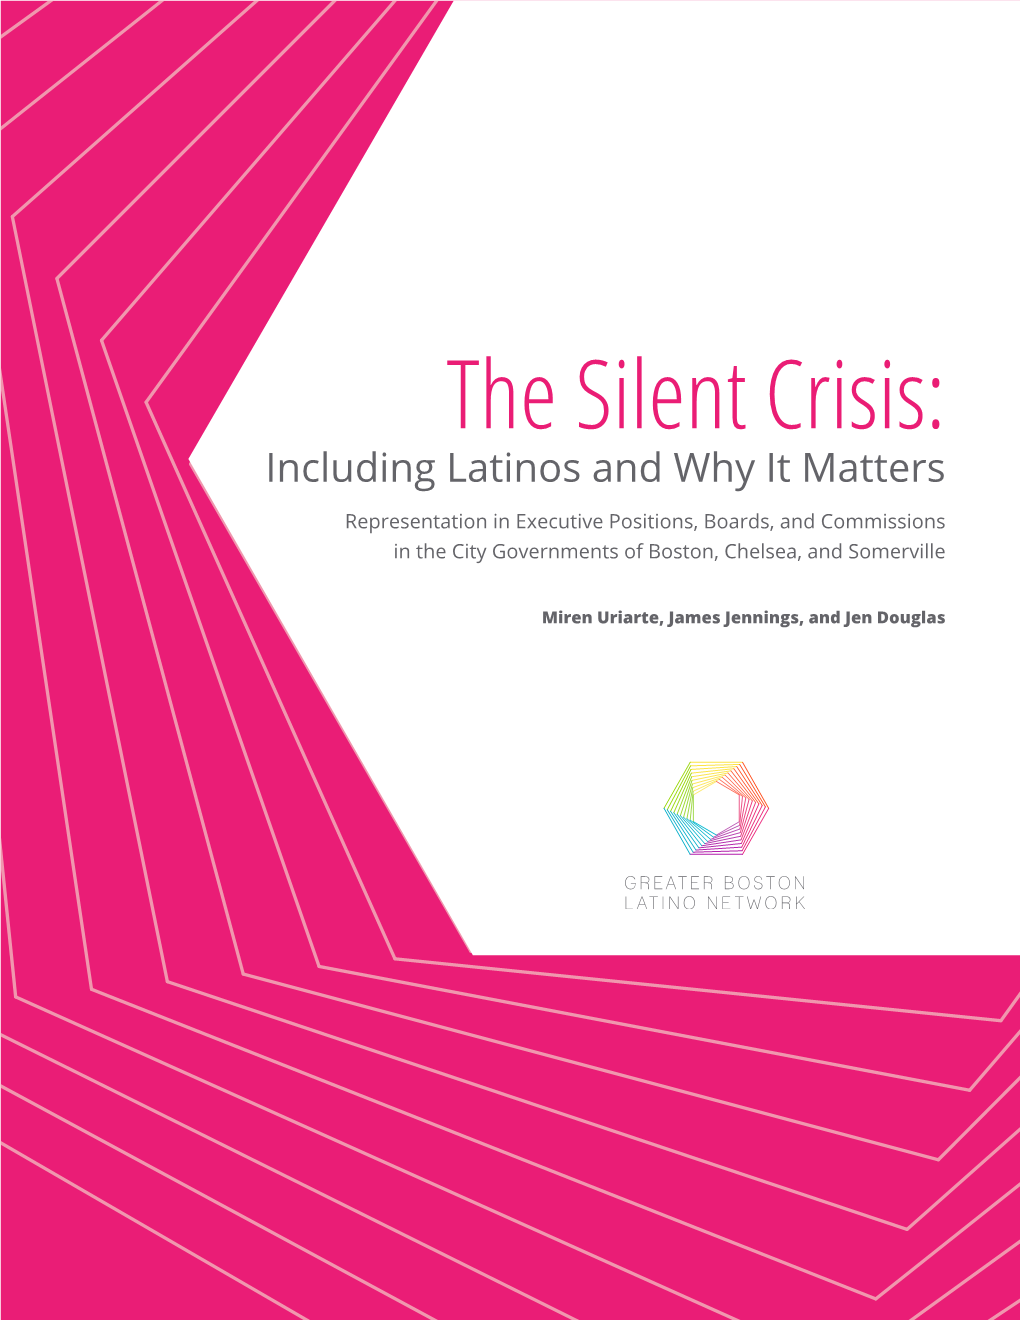 The Silent Crisis: Including Latinos and Why It Matters